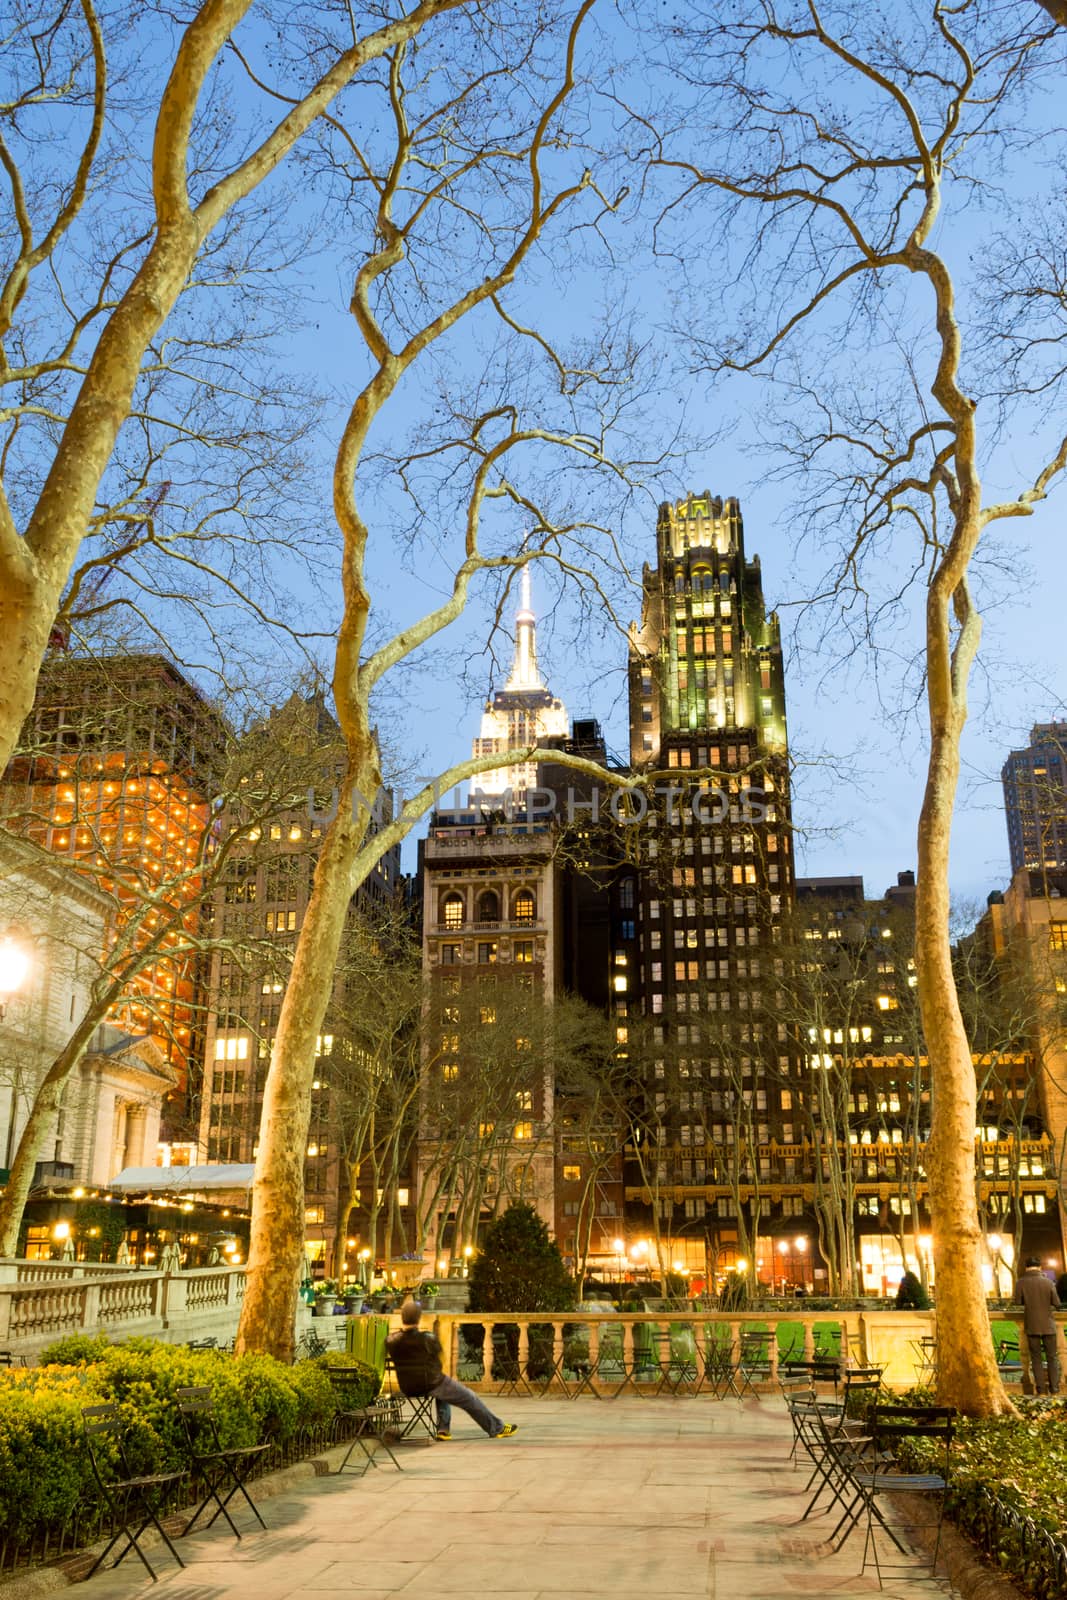 Night lights by Bryant park by rmbarricarte